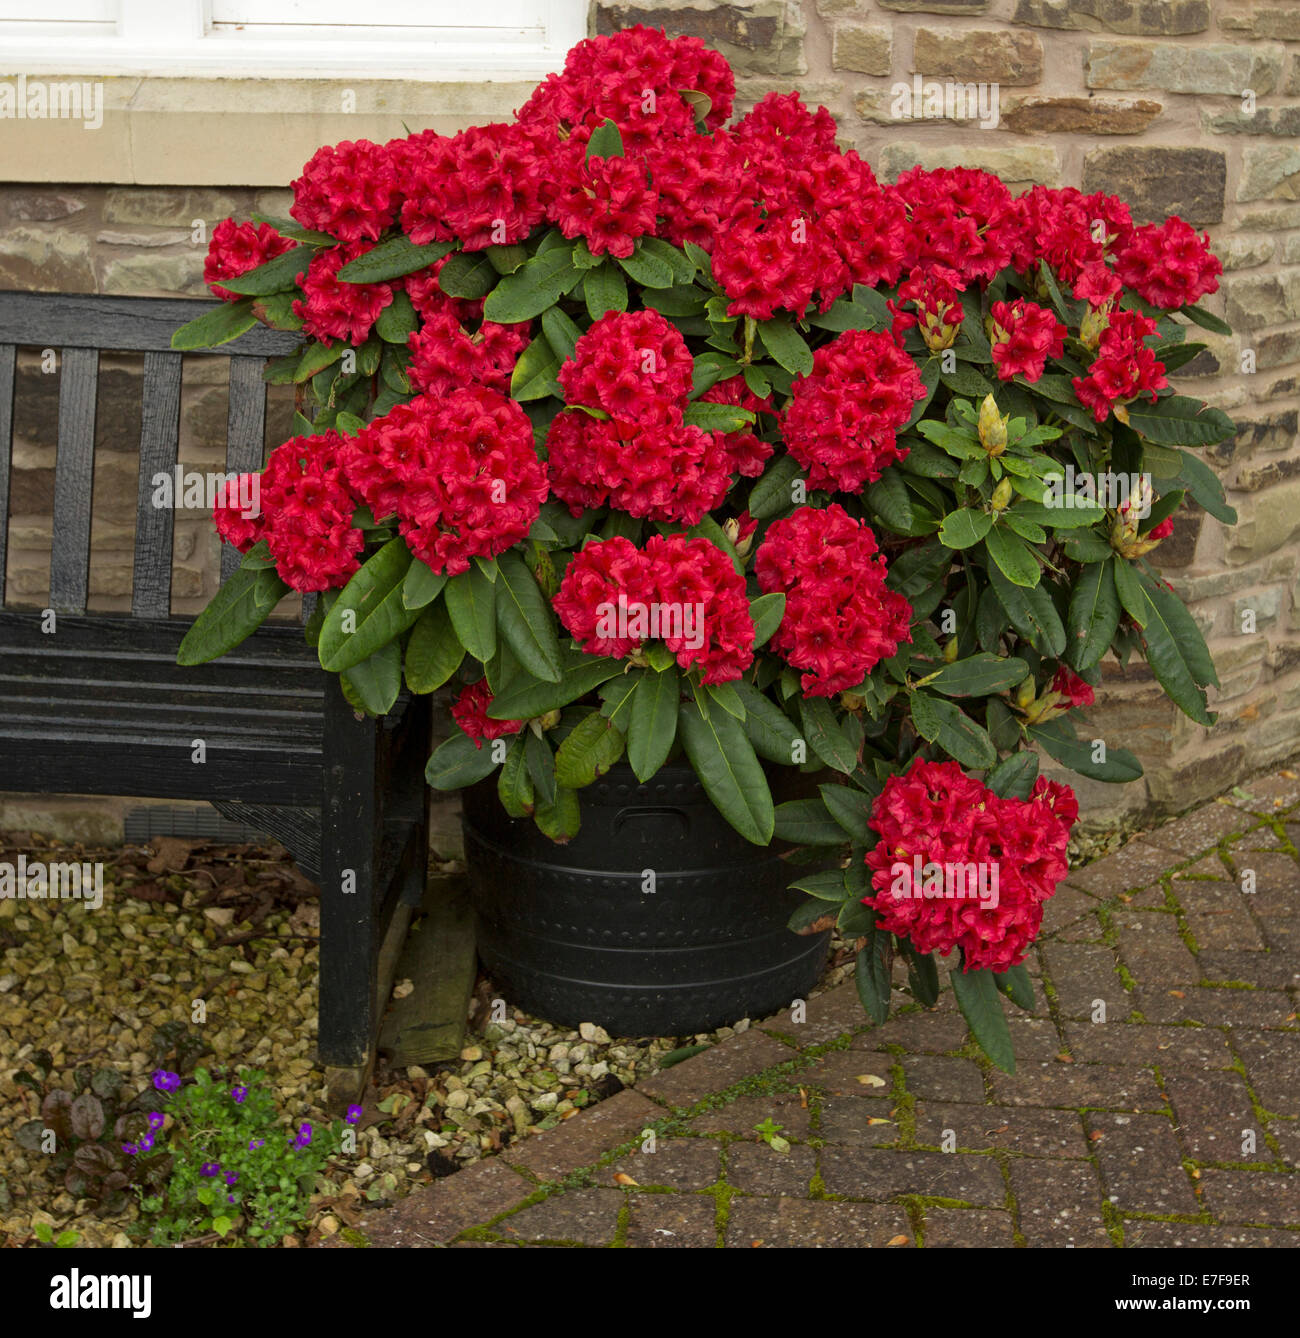 Rhododendron with large clusters of brilliant red flowers growing in wooden tub at Brecon, Wales Stock Photo